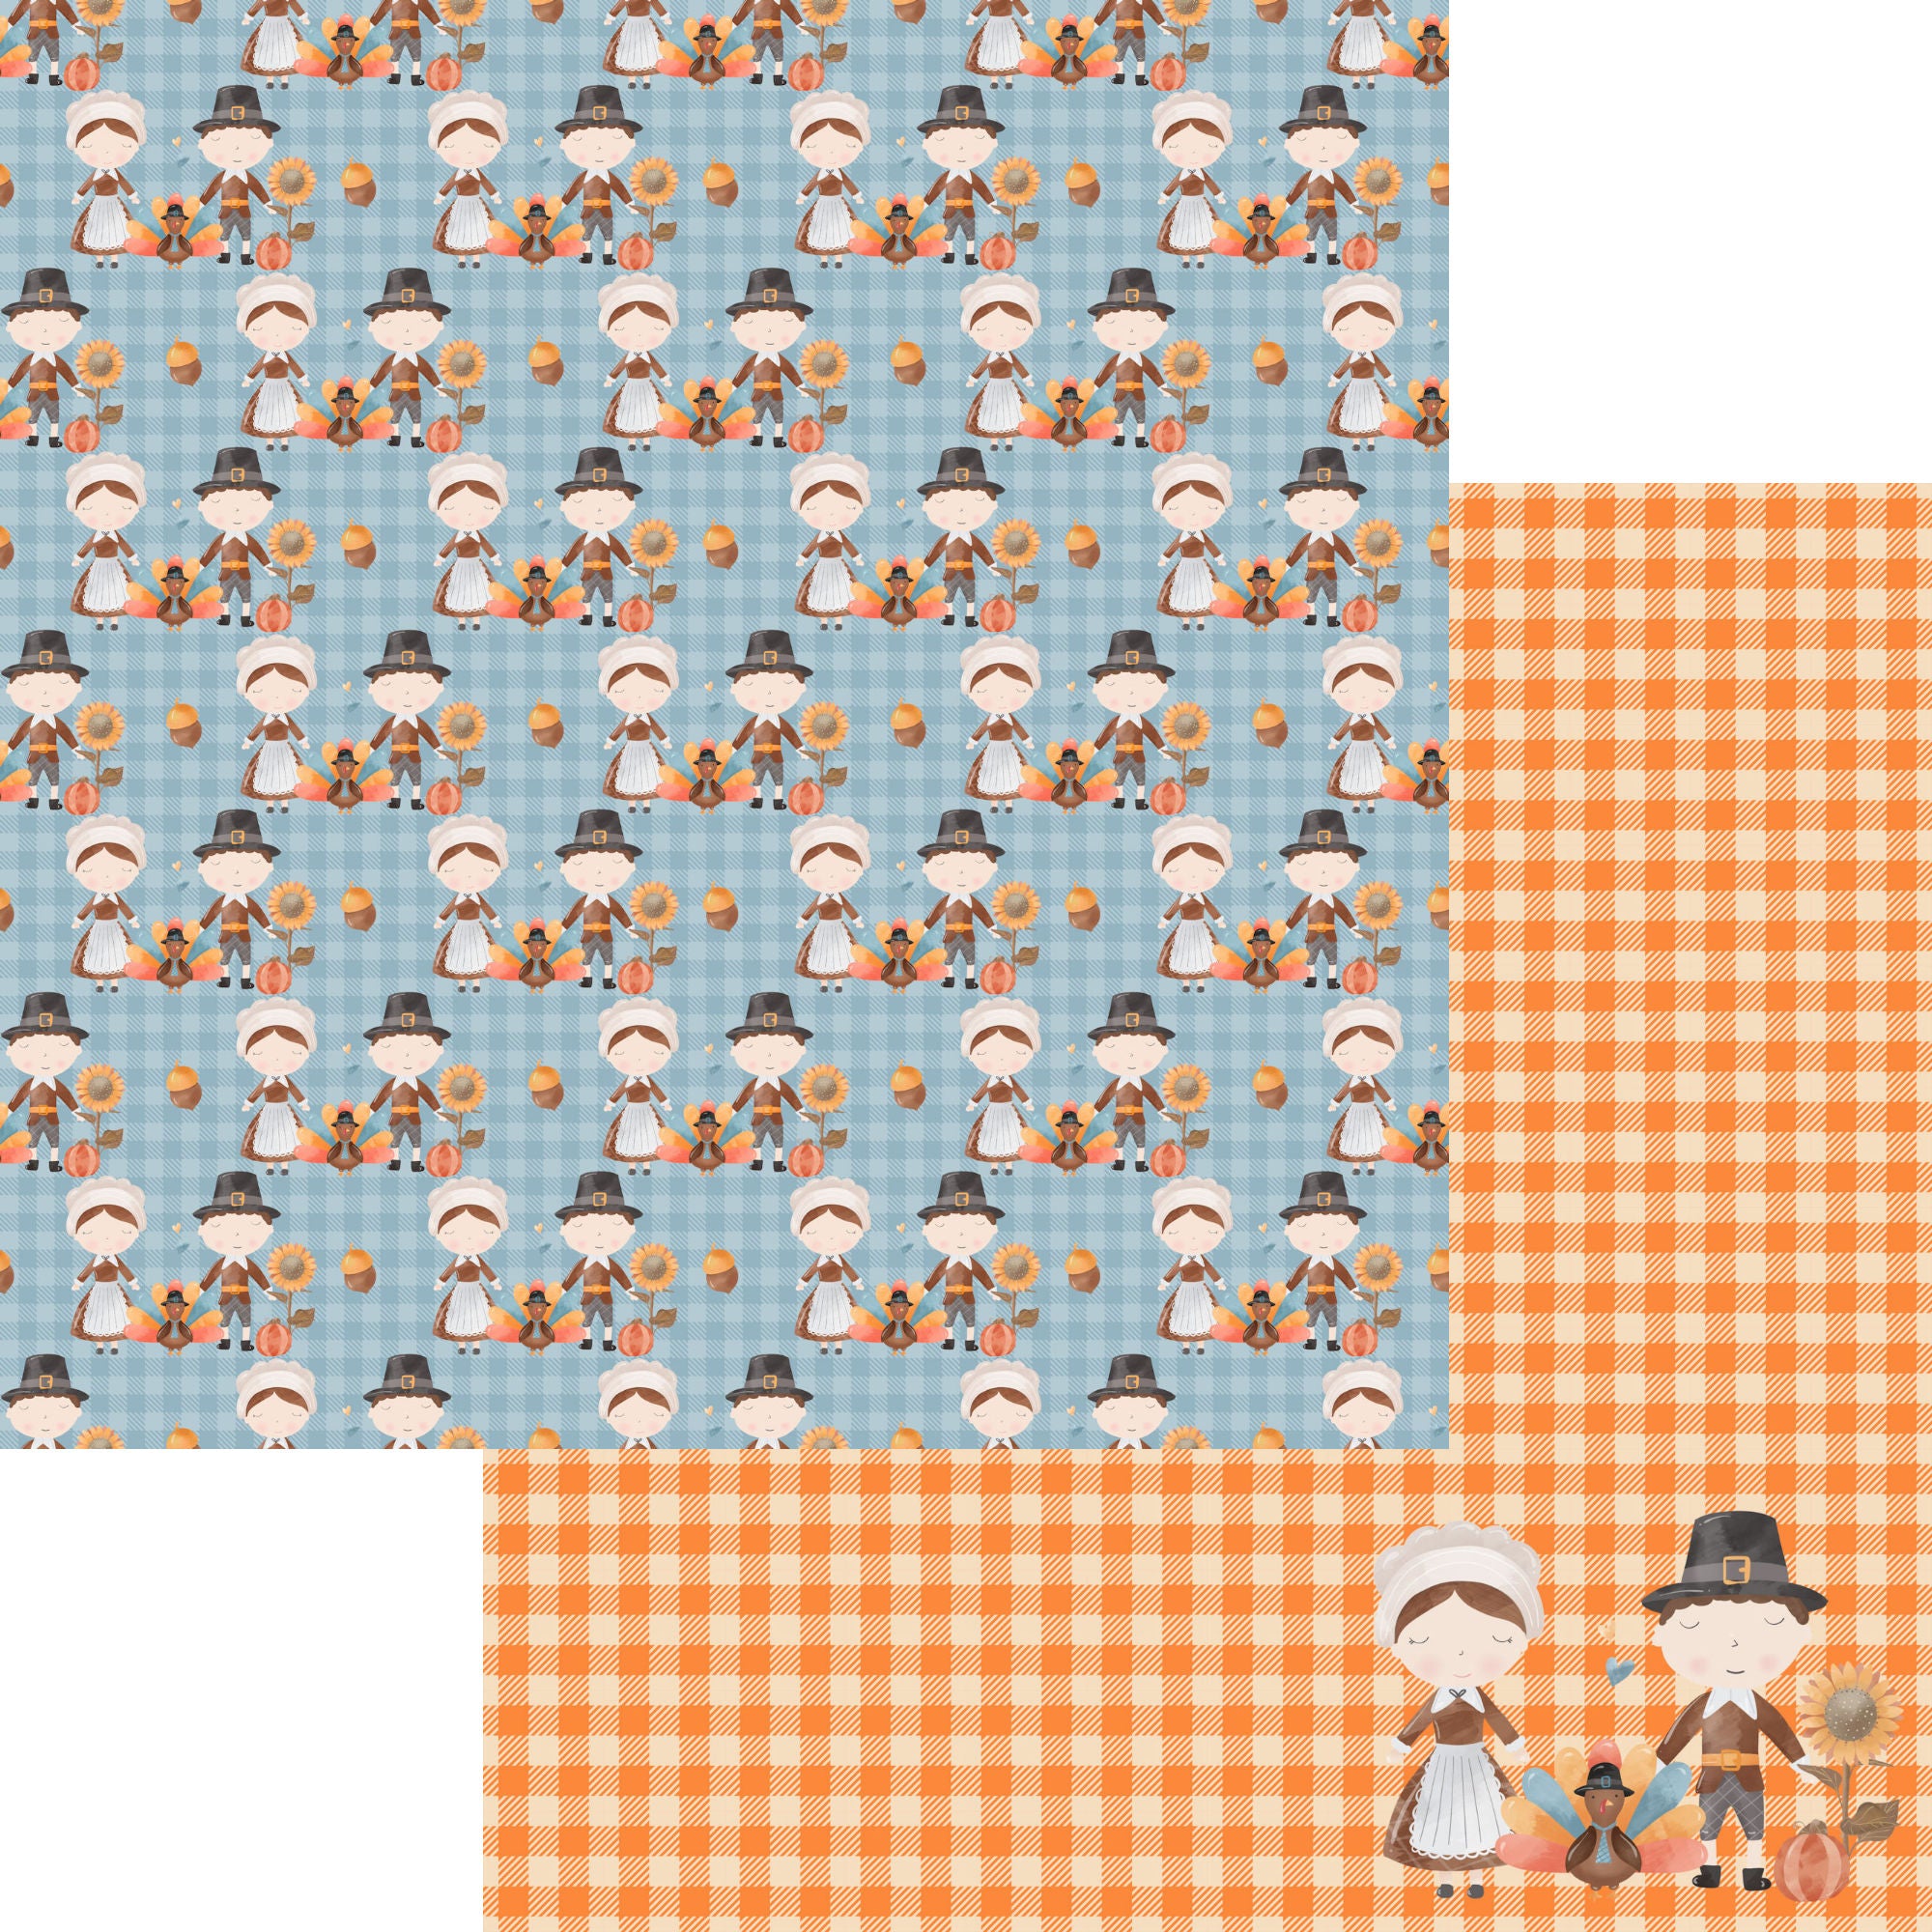 Give Thanks Collection Pilgrim Party 12 x 12 Double-Sided Scrapbook Paper by SSC Designs